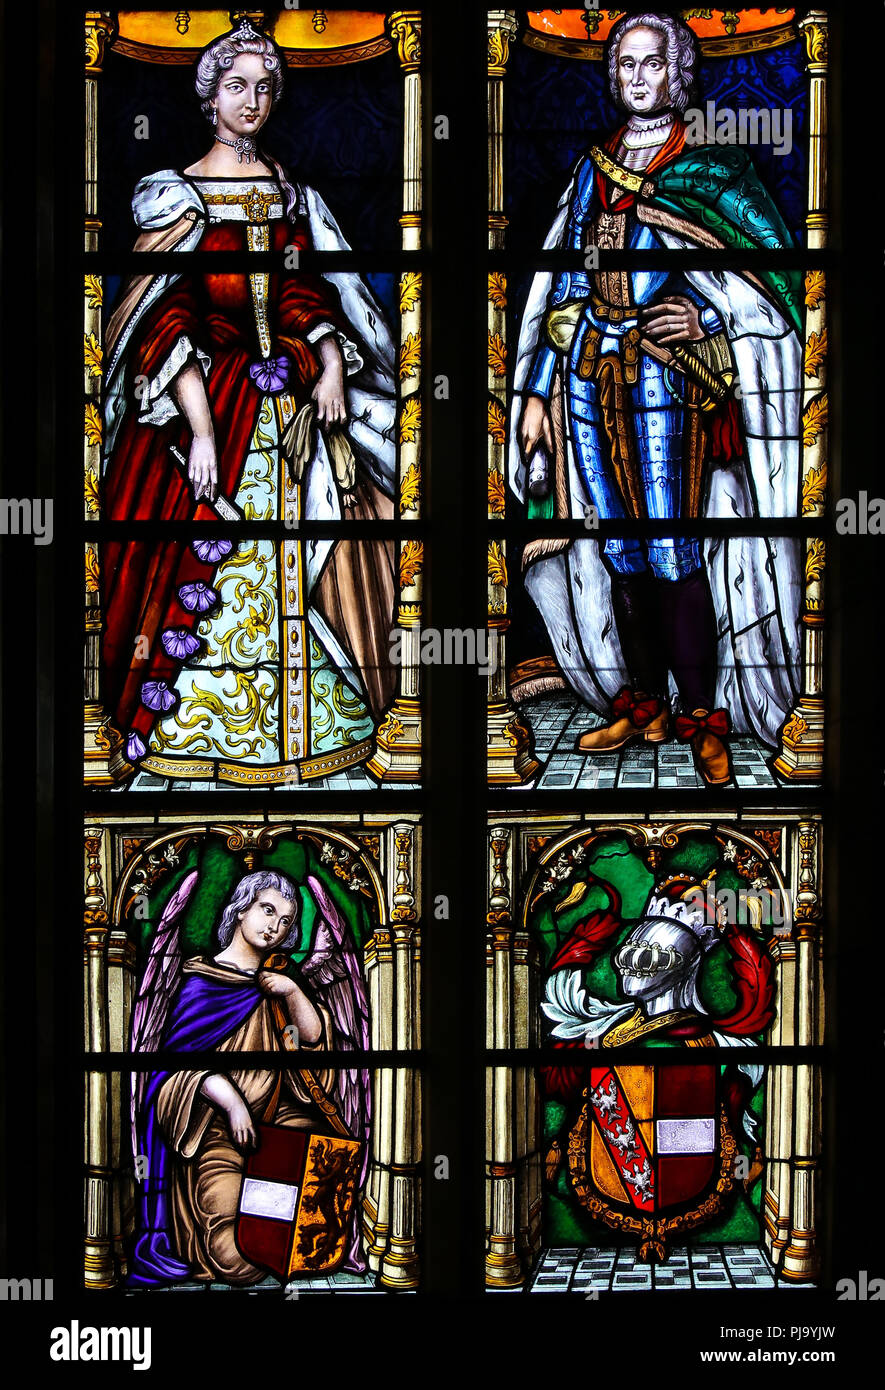 Stained Glass in the Basilica of the Holy Blood in Bruges, Belgium, depicting Maria Theresa, ruler of the Habsburg dominions including the Spanish Net Stock Photo